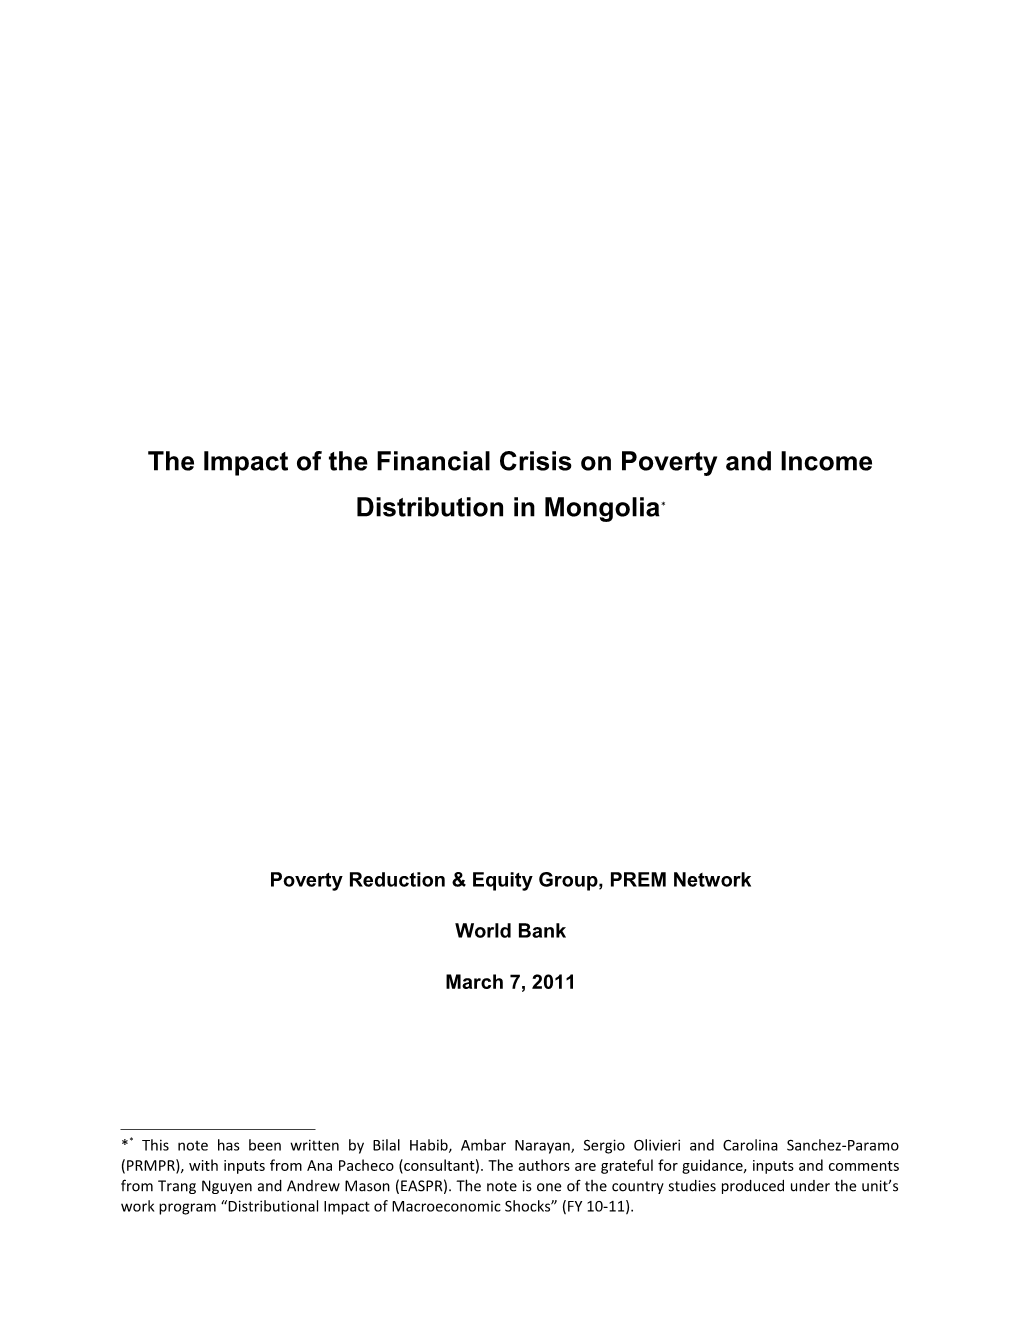 Poverty Reduction & Equity Group, PREM Network